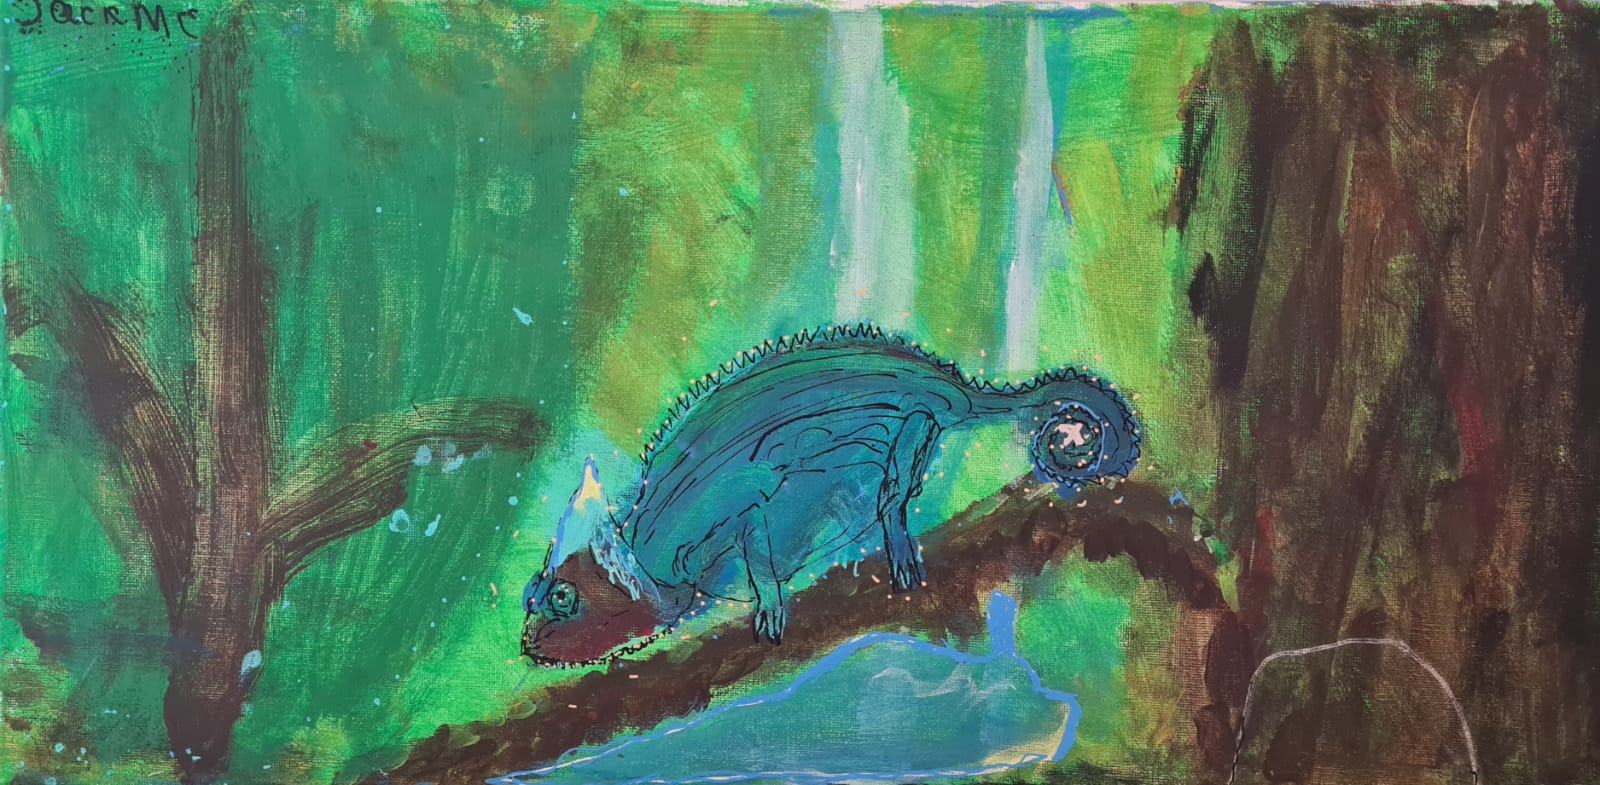 'A lizards life' by Jack (6) from Meath